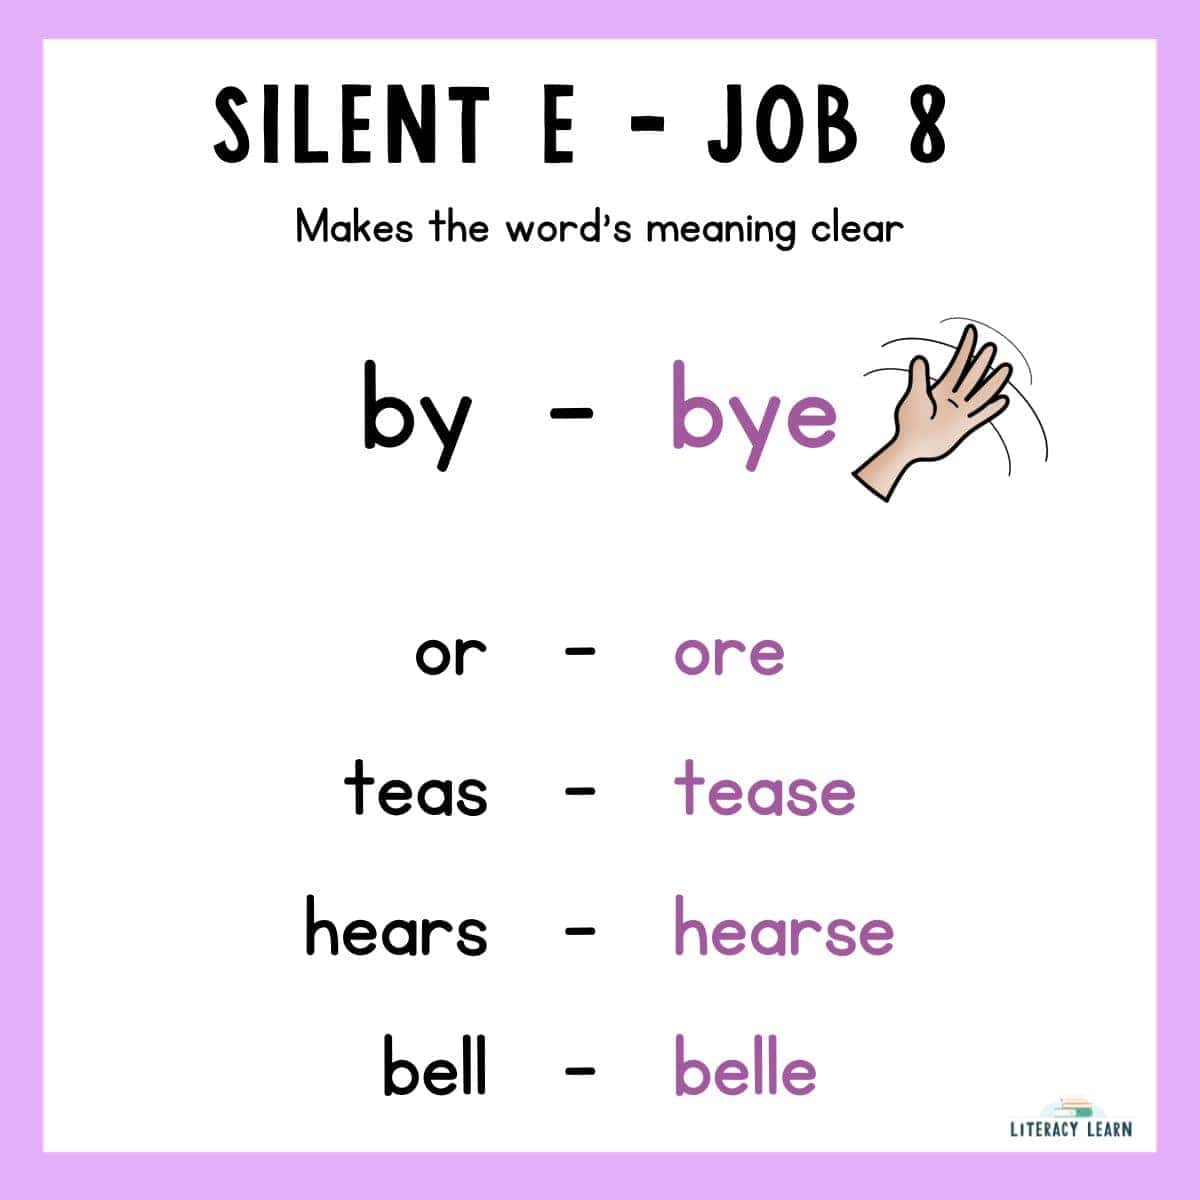 Pink graphic showing job 8 of the final silent E with words and examples.